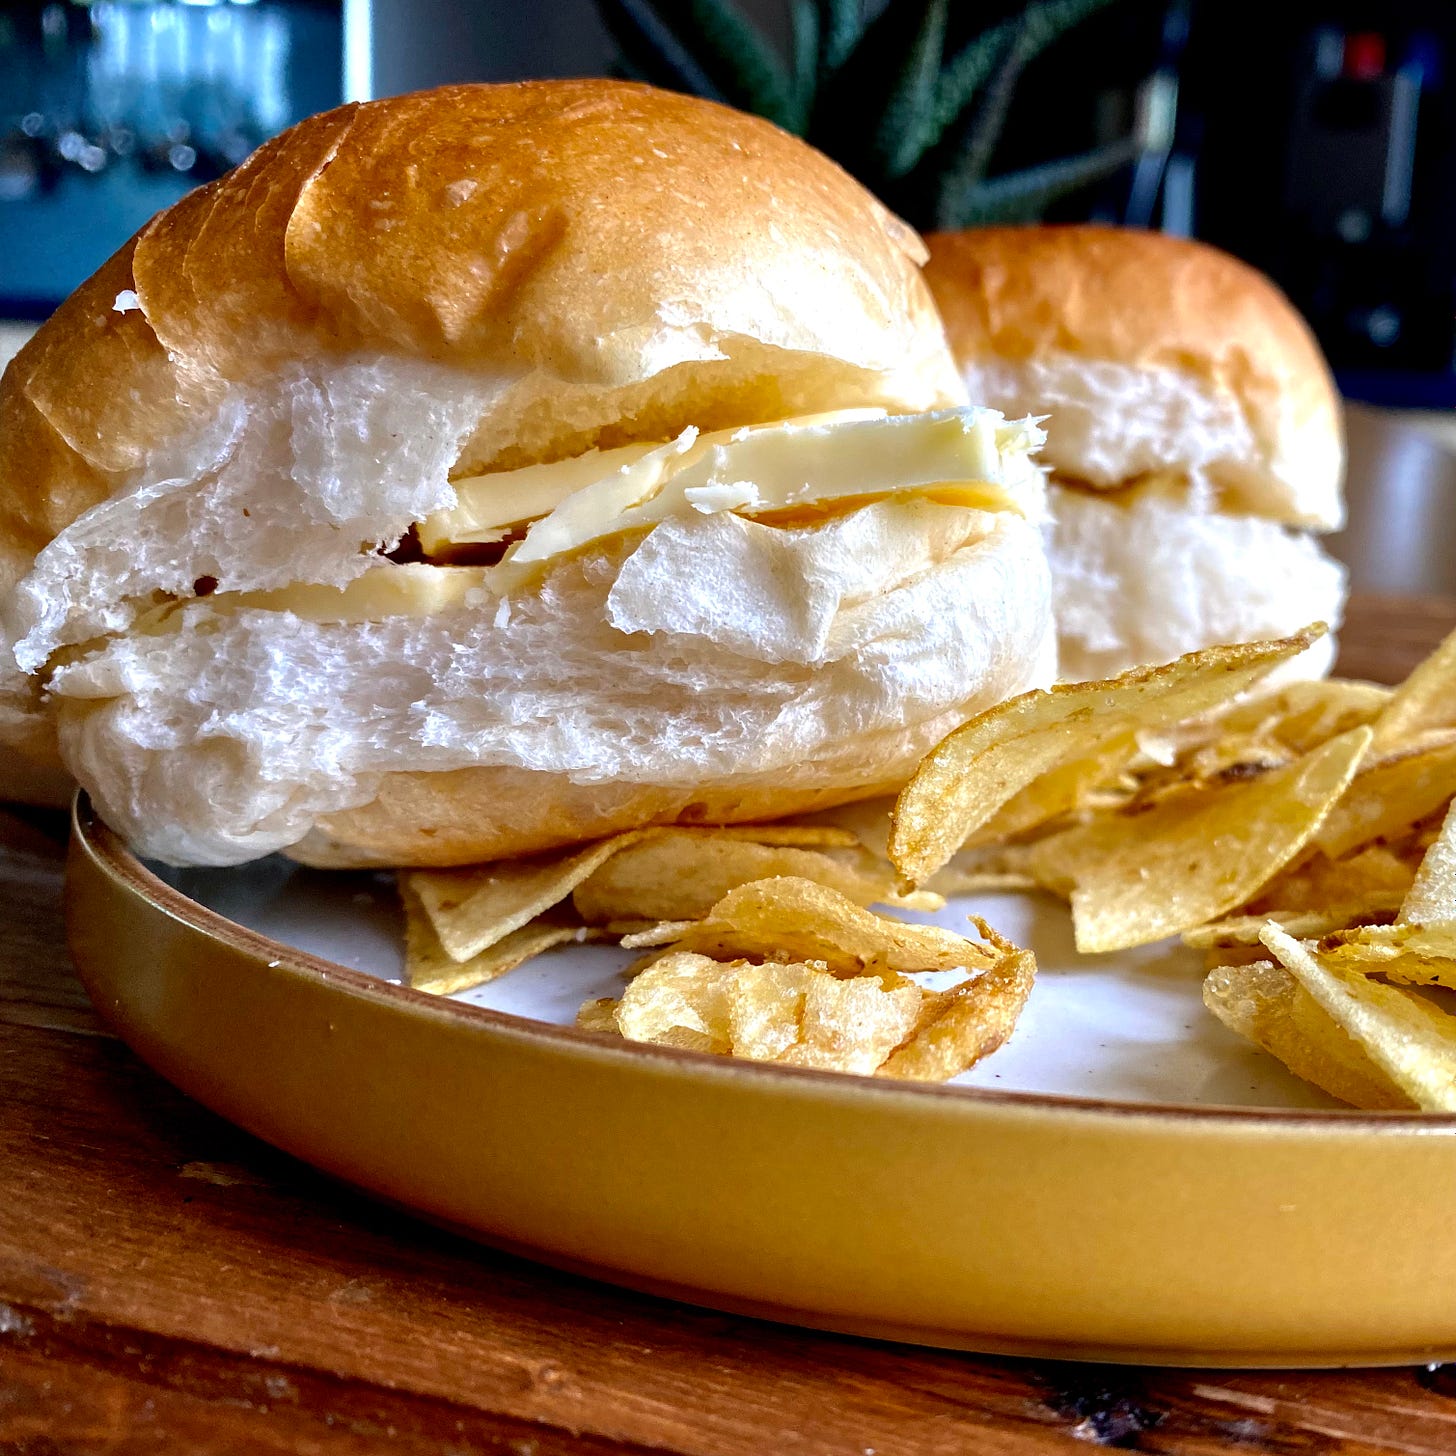 Yellow plate with two soft white bread rolls filled with cheese, a few crisps to the side.